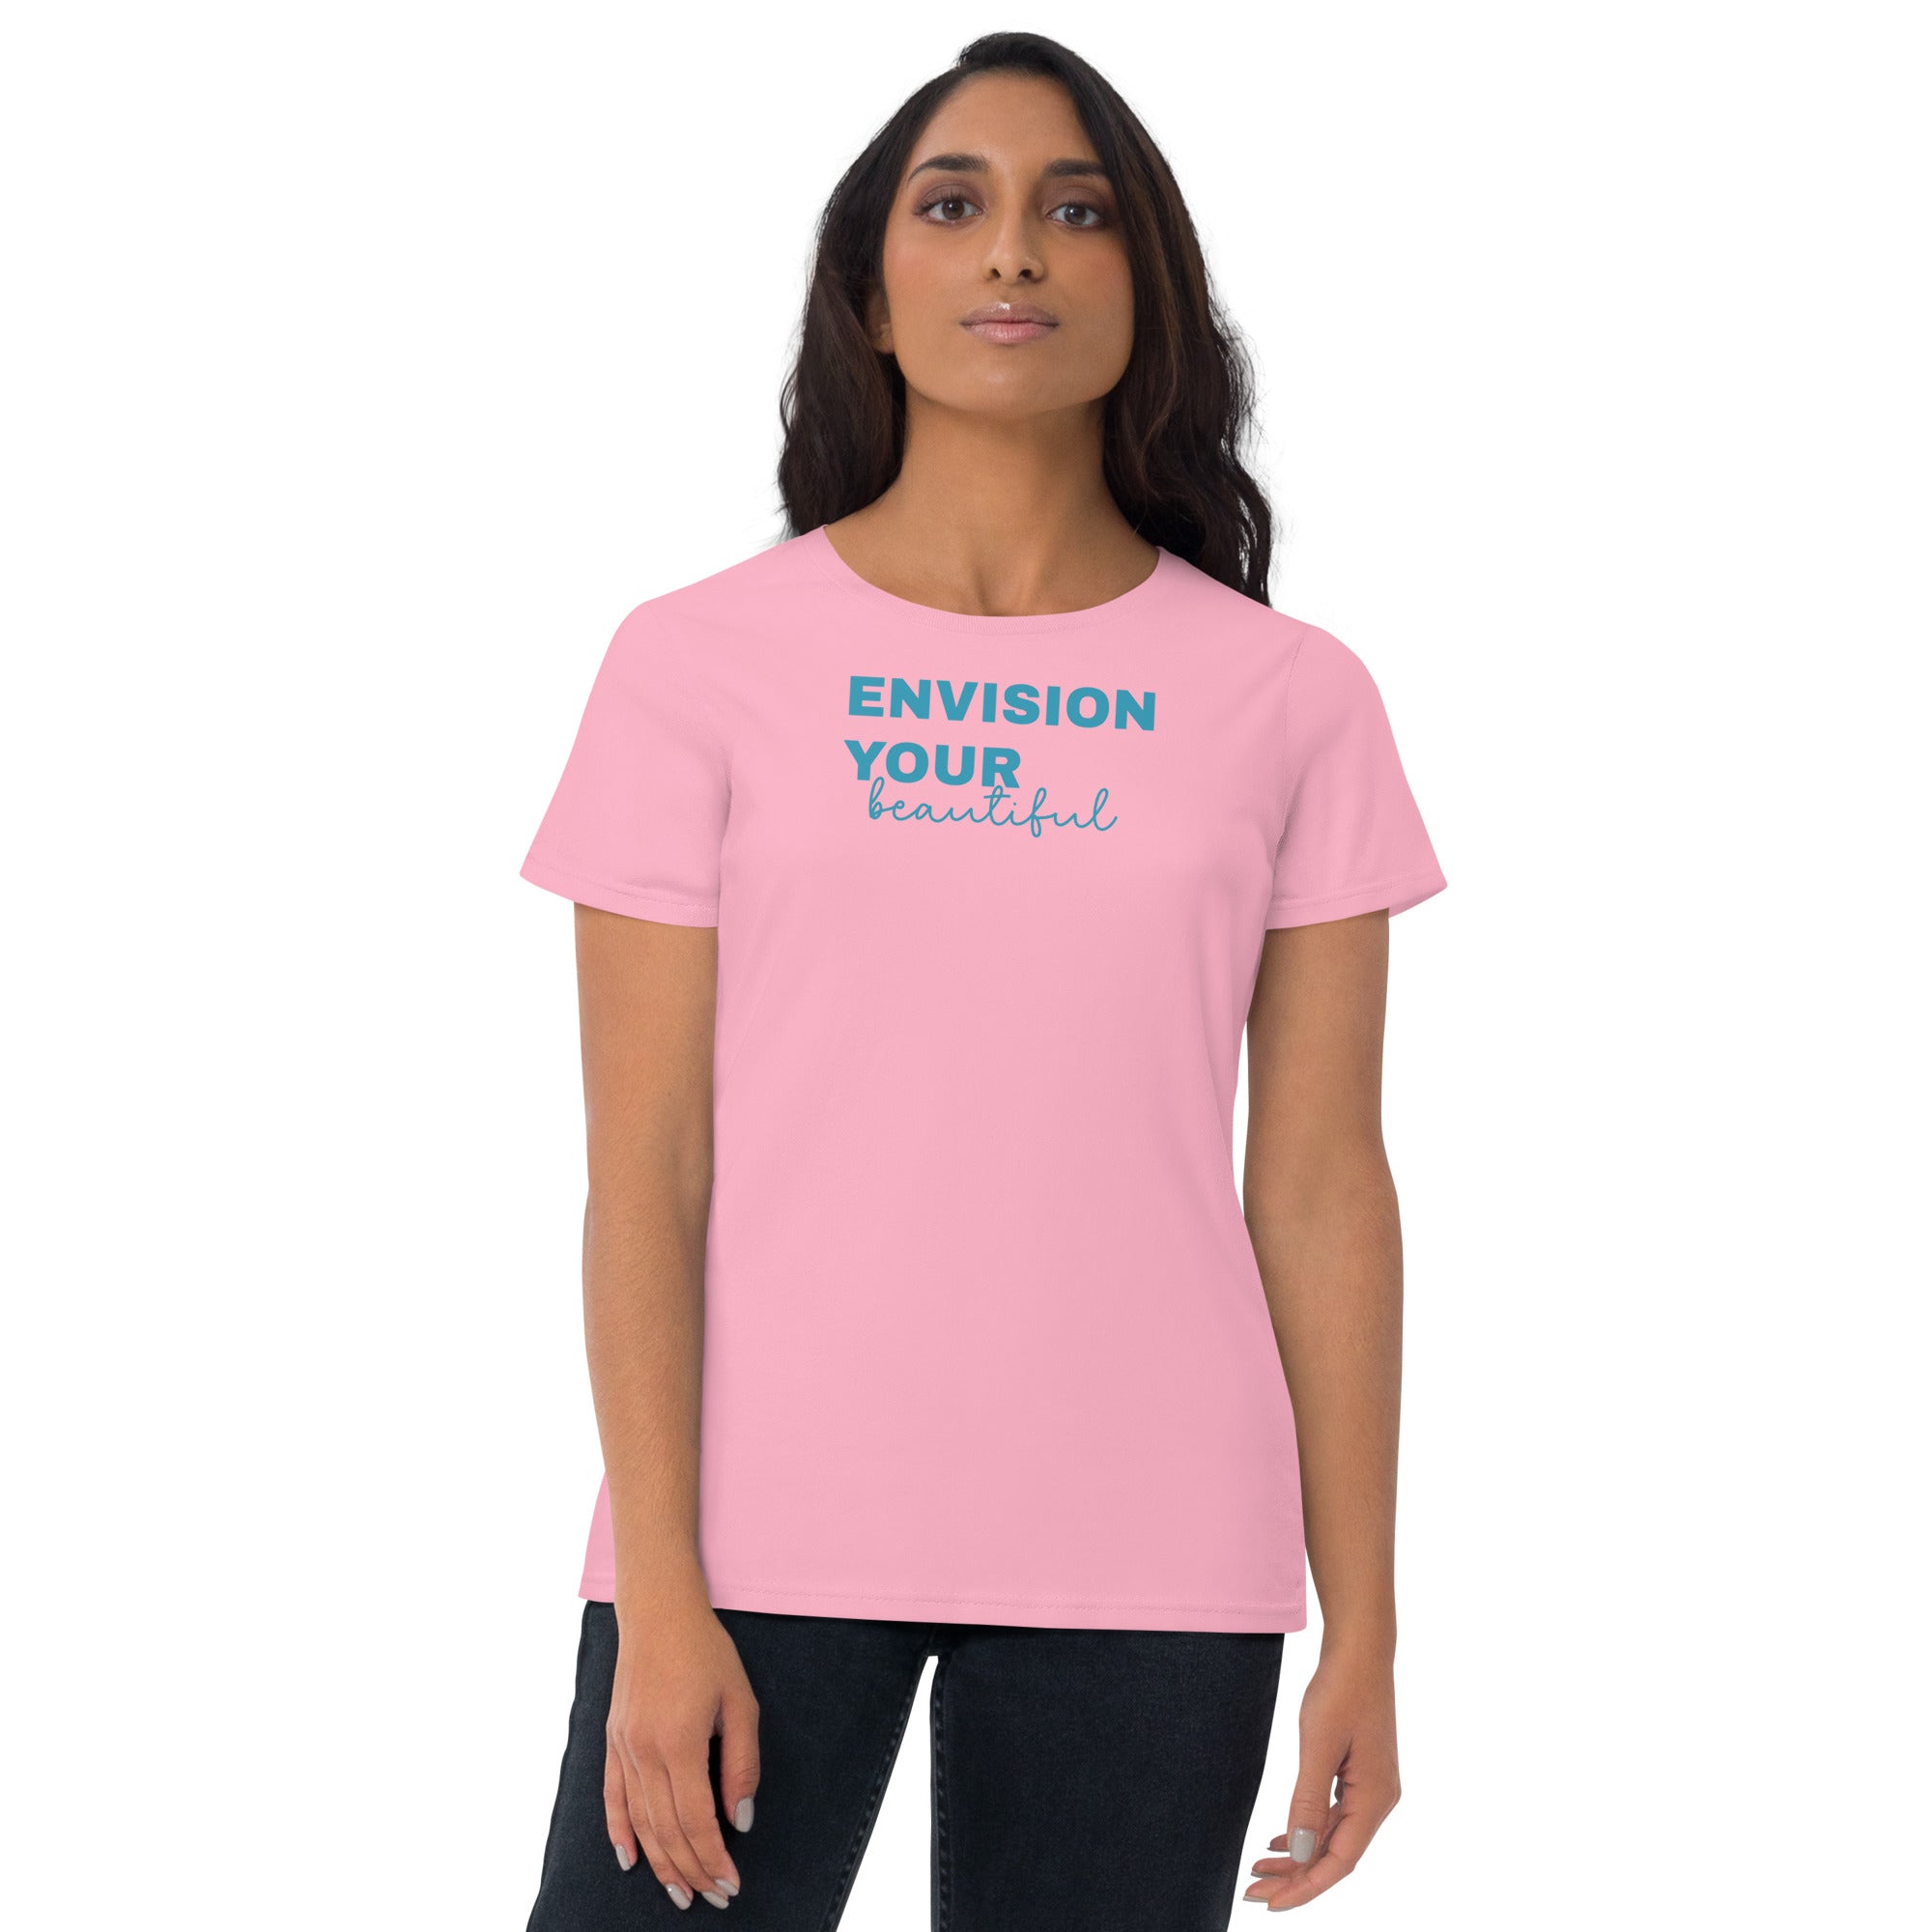 "Envision Your Beautiful" Women's T-shirt - Sabrena Sharonne